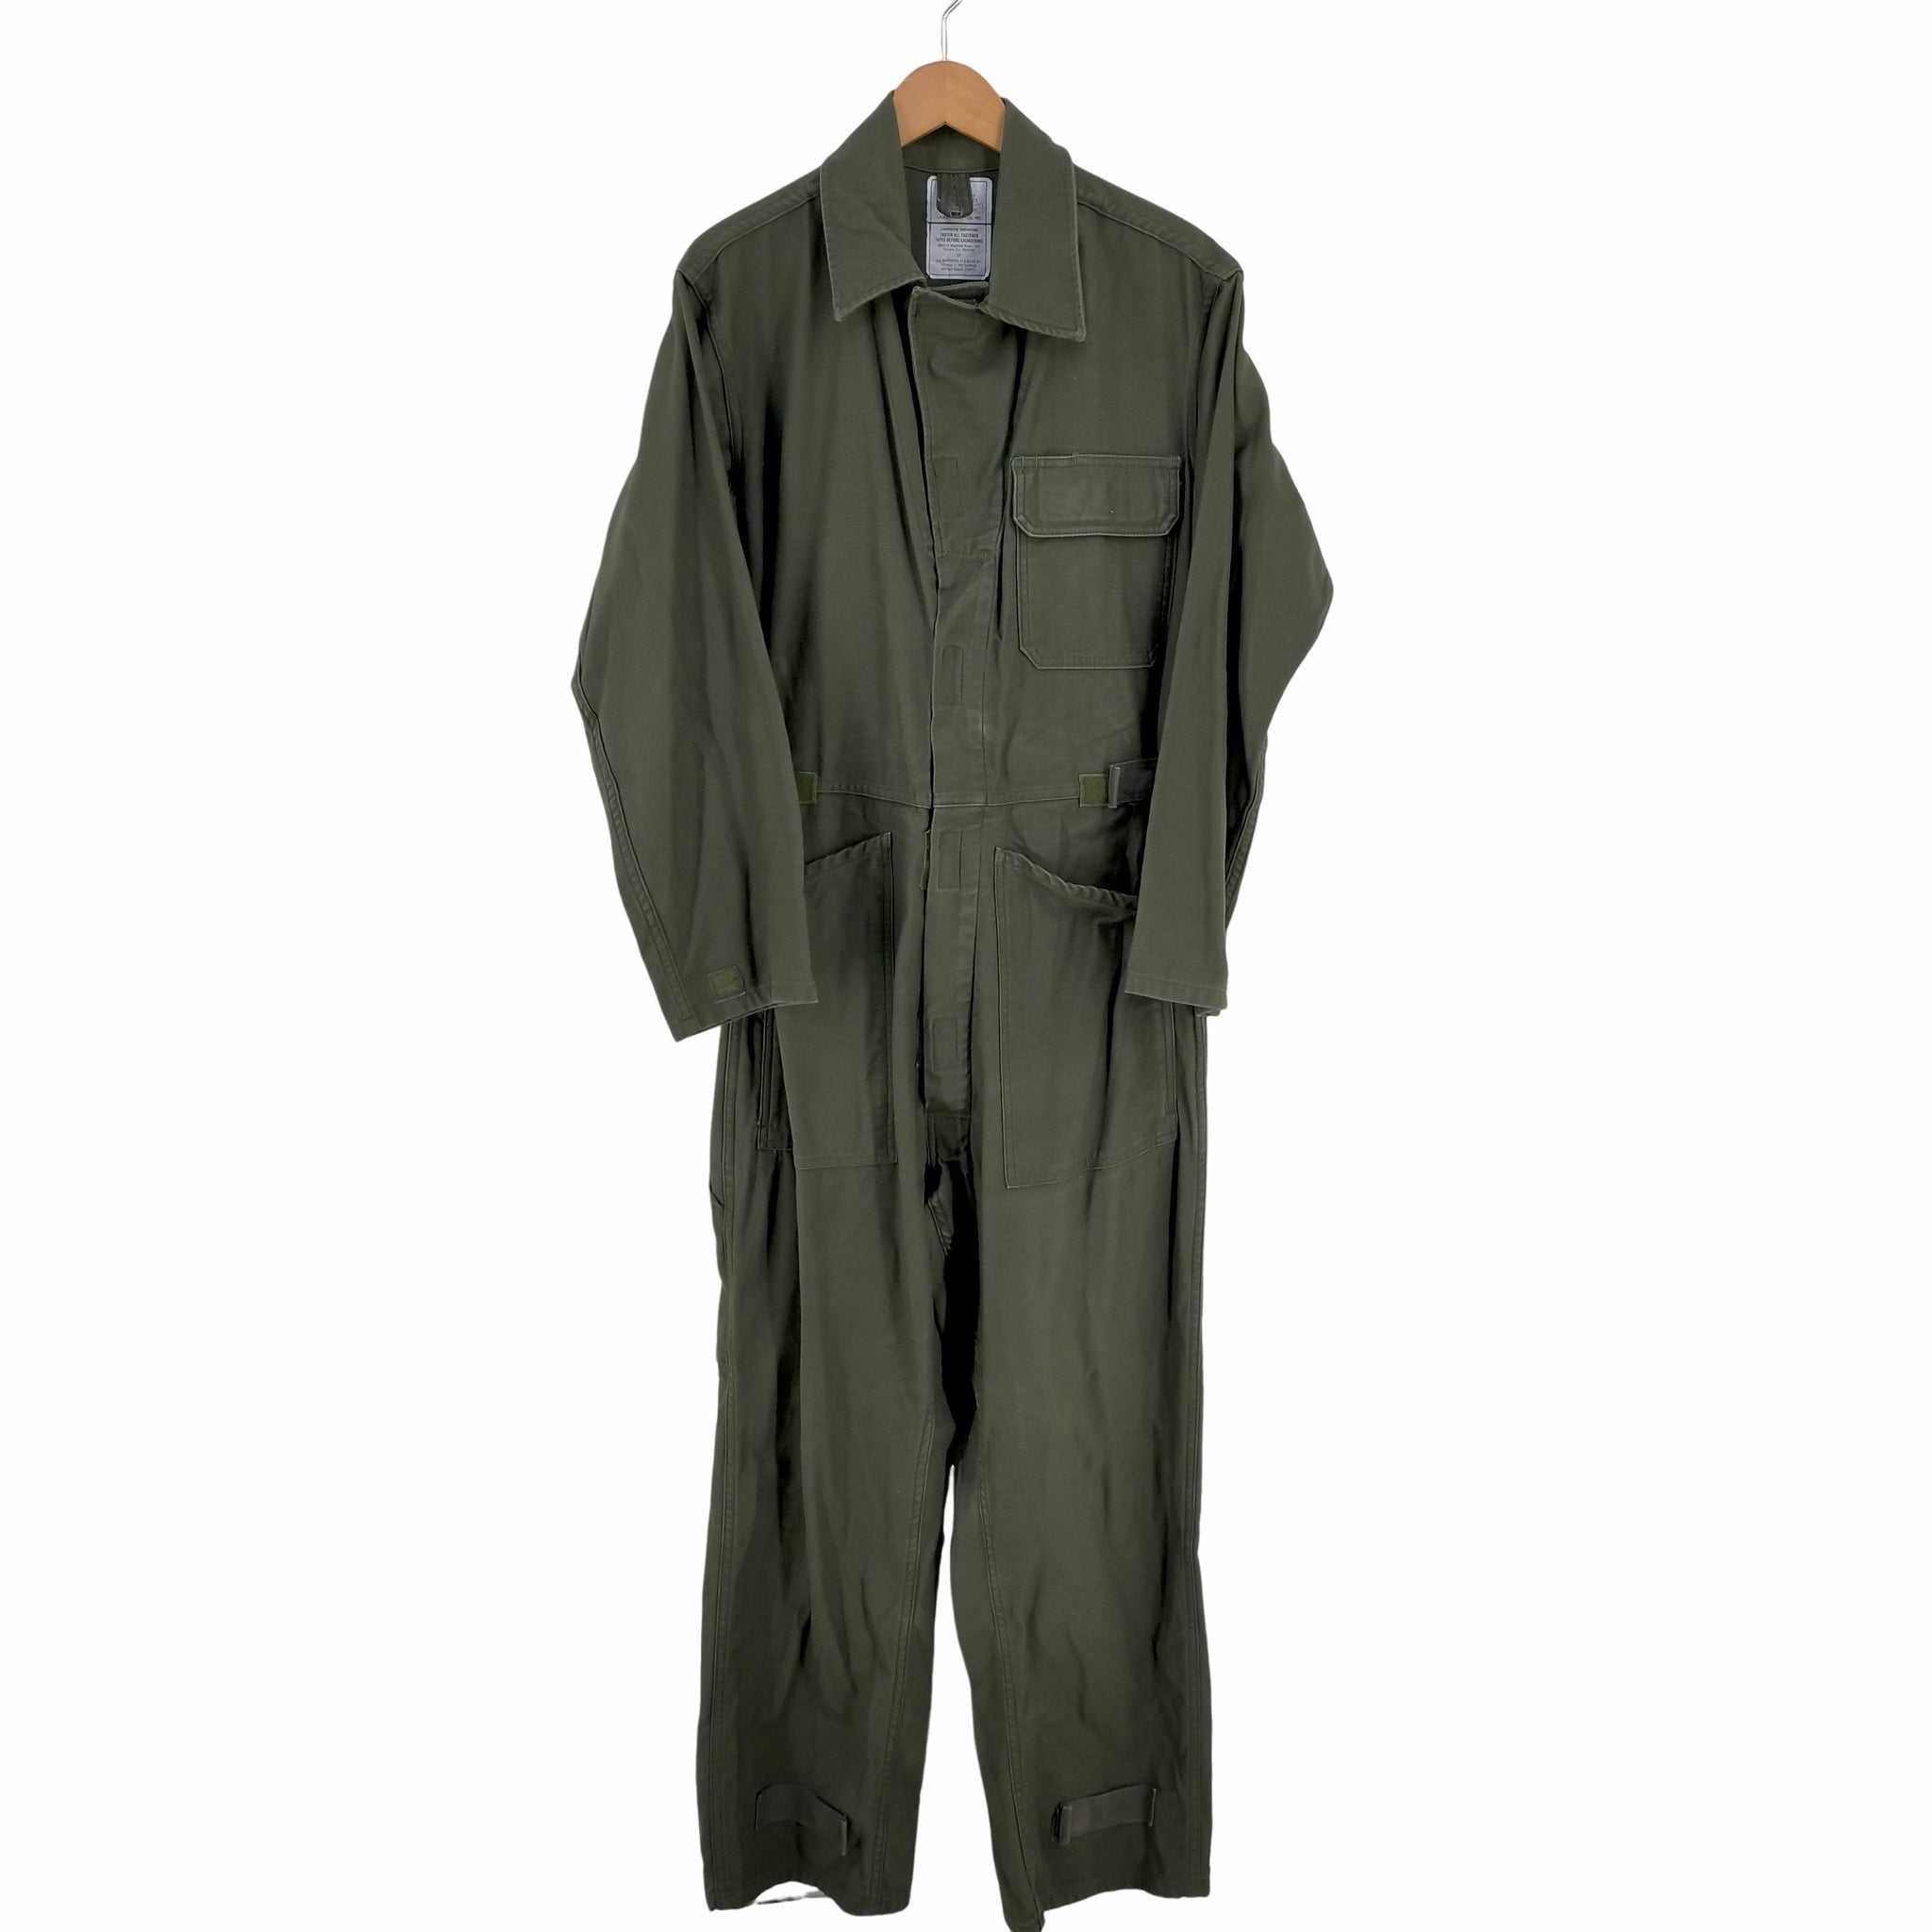 US ARMY(ユーエスアーミー)COVERALLS COTTON SATEEN TYPE1